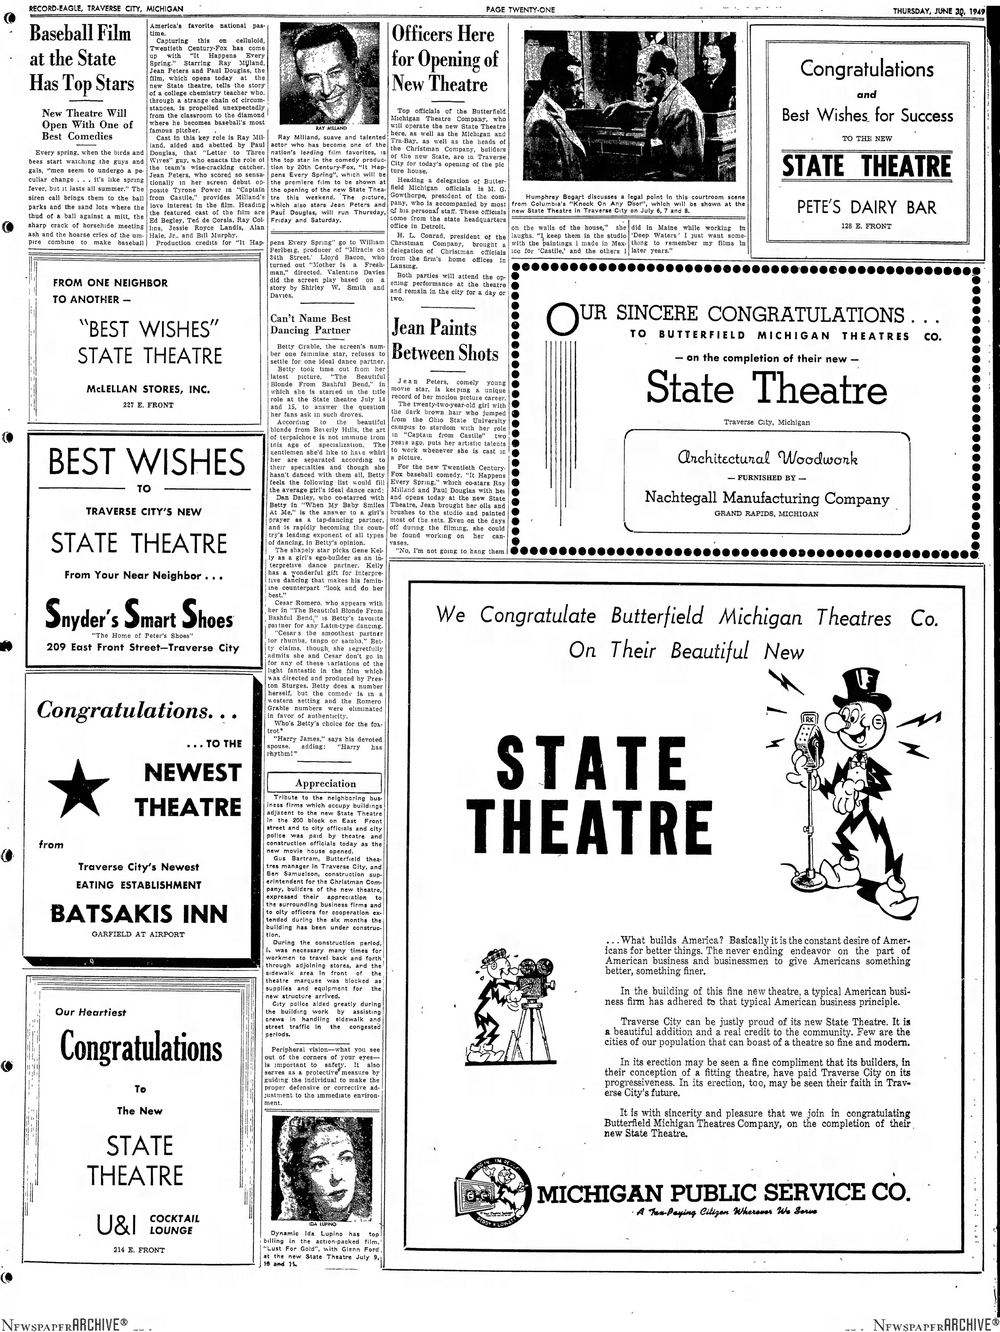 State Theatre - June 1949 State Theater Opening Announcements